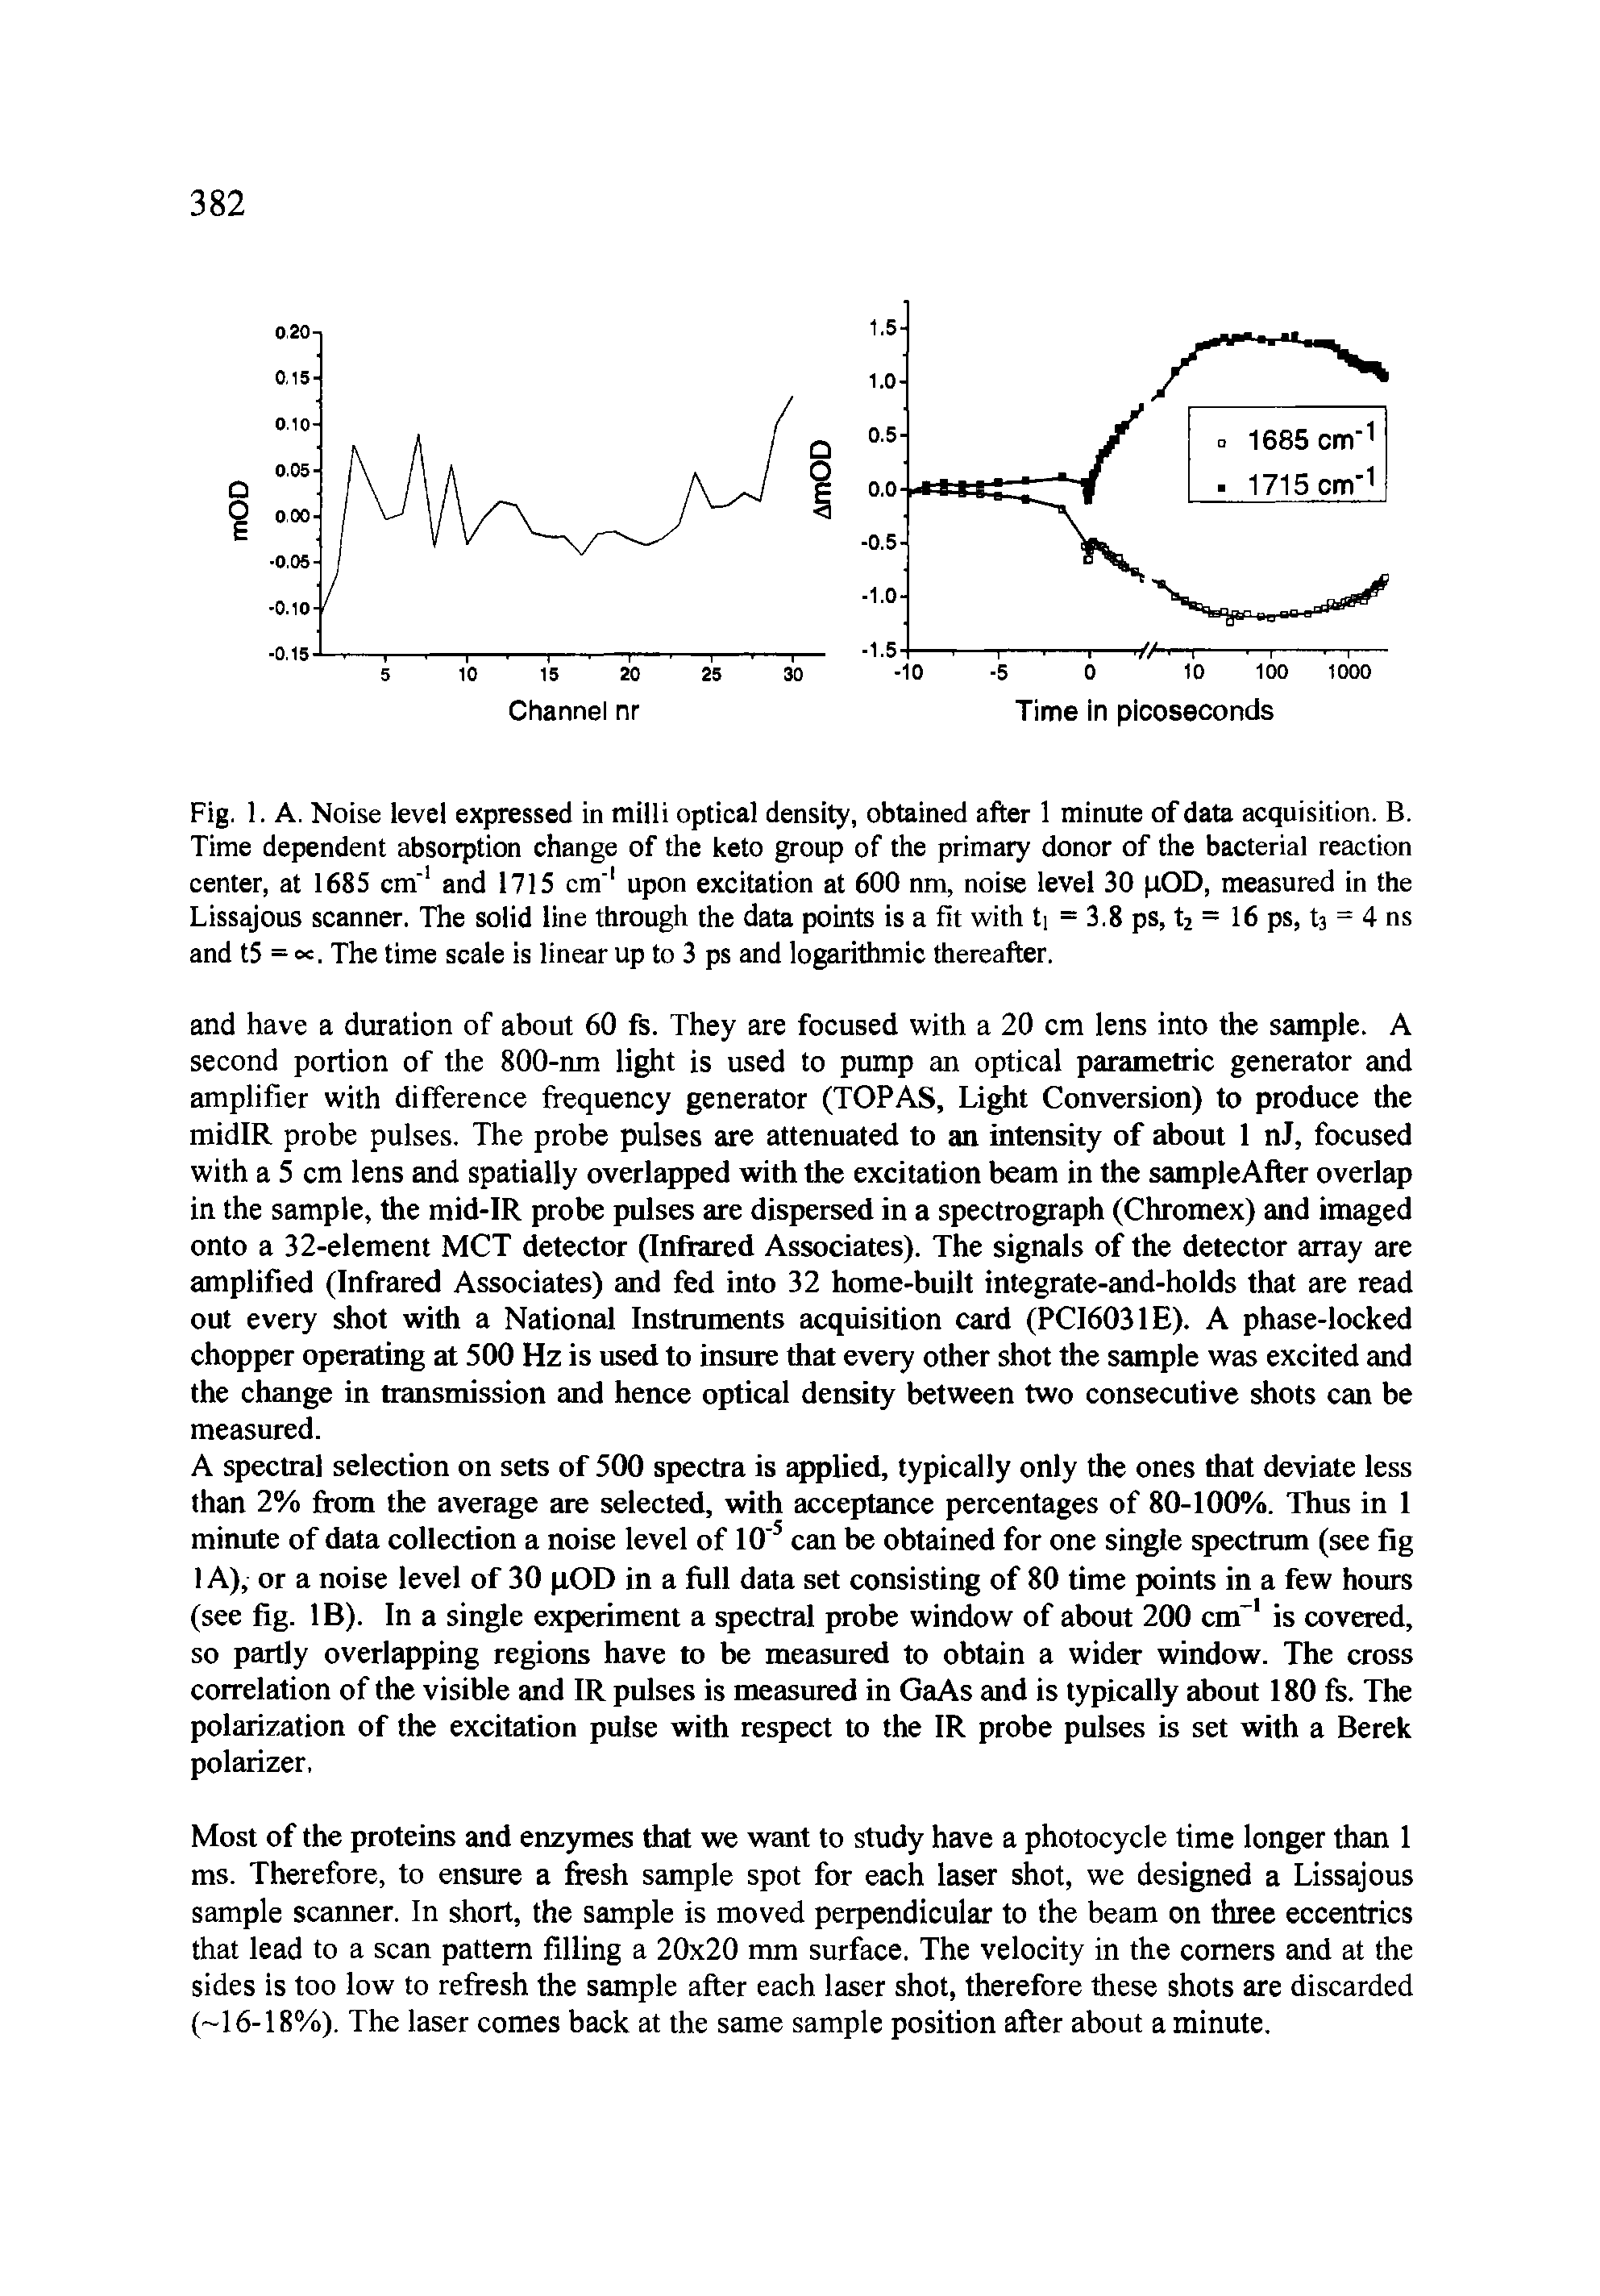 Fig. 1. A. Noise level expressed in milli optical density, obtained after 1 minute of data acquisition. B. Time dependent absorption change of the keto group of the primary donor of the bacterial reaction center, at 1685 cm 1 and 1715 cm 1 upon excitation at 600 nm, noise level 30 pOD, measured in the Lissajous scanner. The solid line through the data points is a fit with = 3.8 ps, t2 = 16 ps, t3 = 4 ns and t5 = oc. The time scale is linear up to 3 ps and logarithmic thereafter.